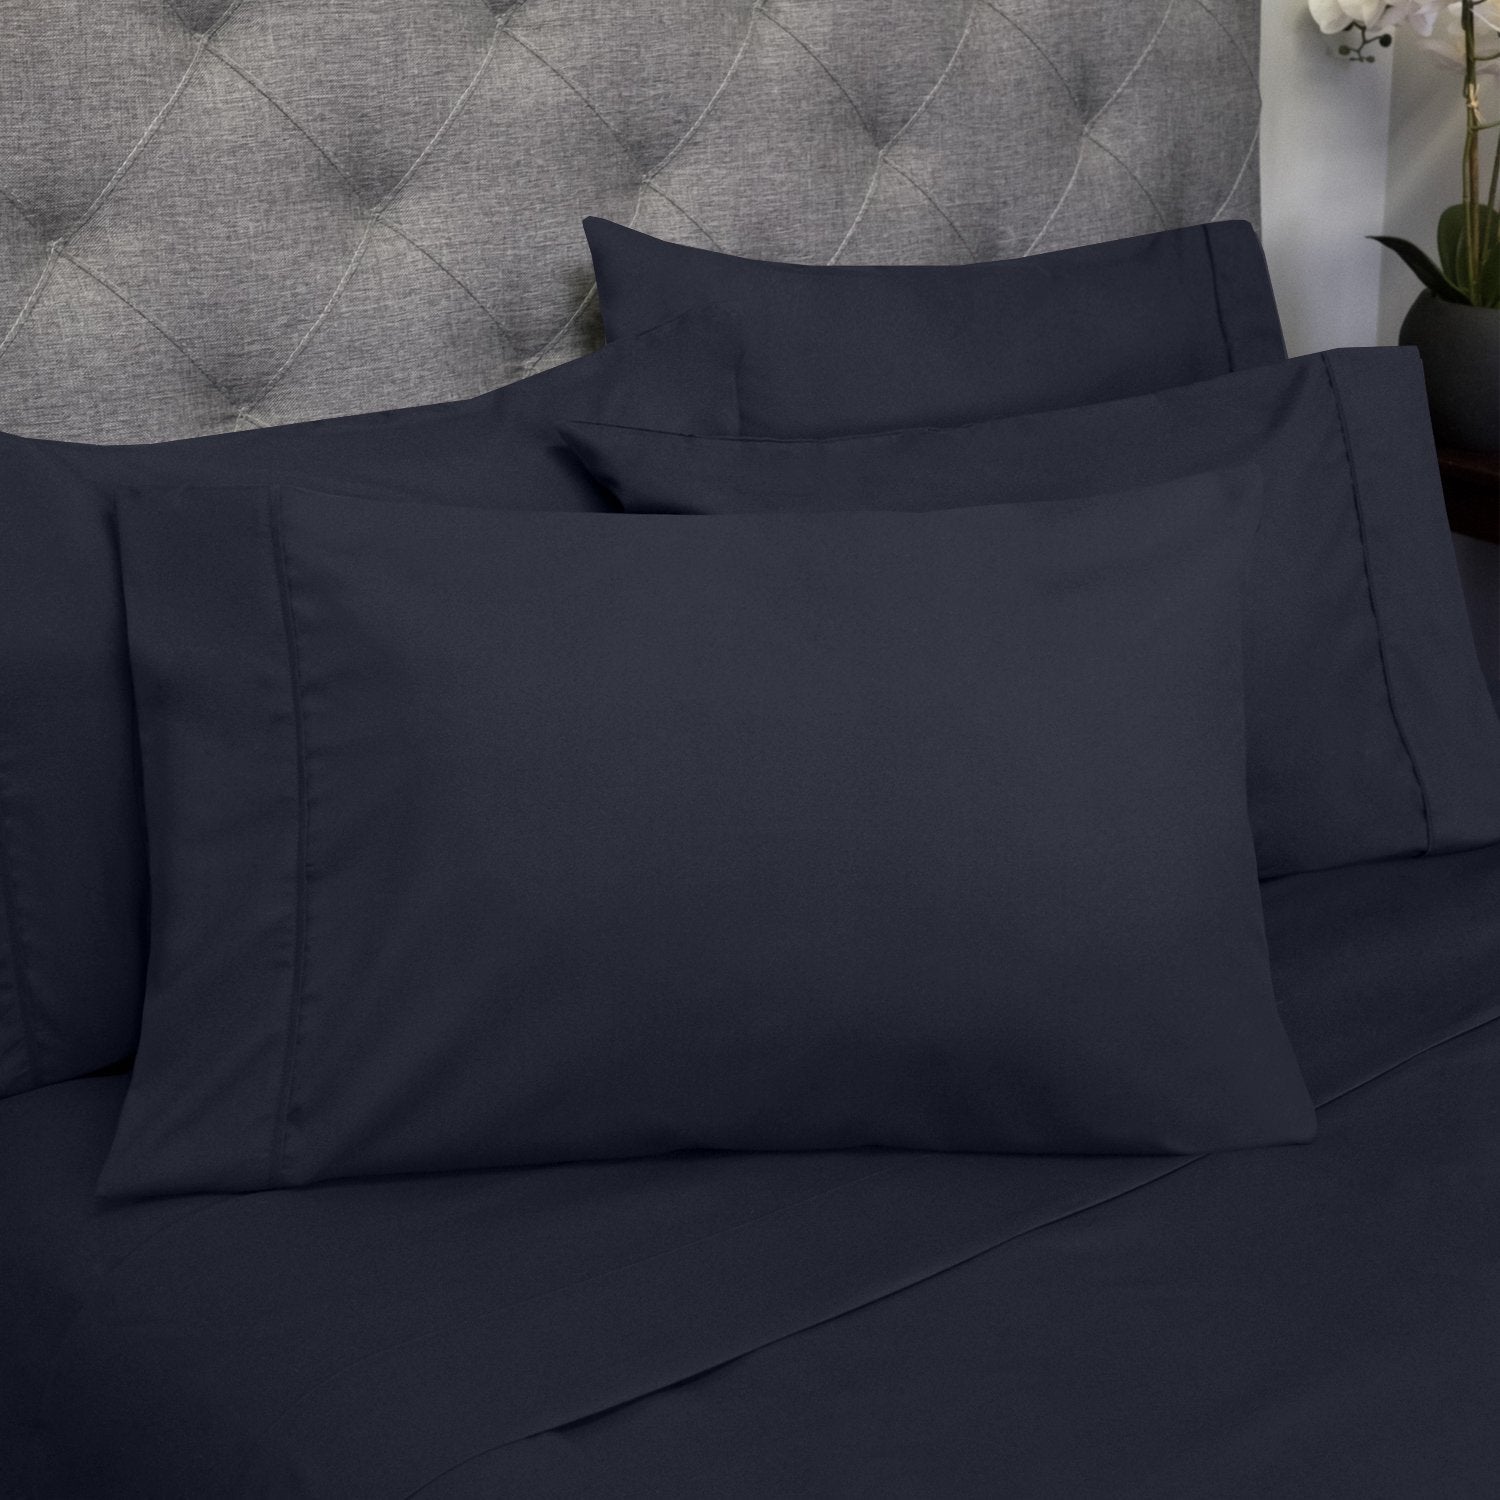 Deluxe 6-Piece Bed Sheet Set (Navy) - Pillowcases